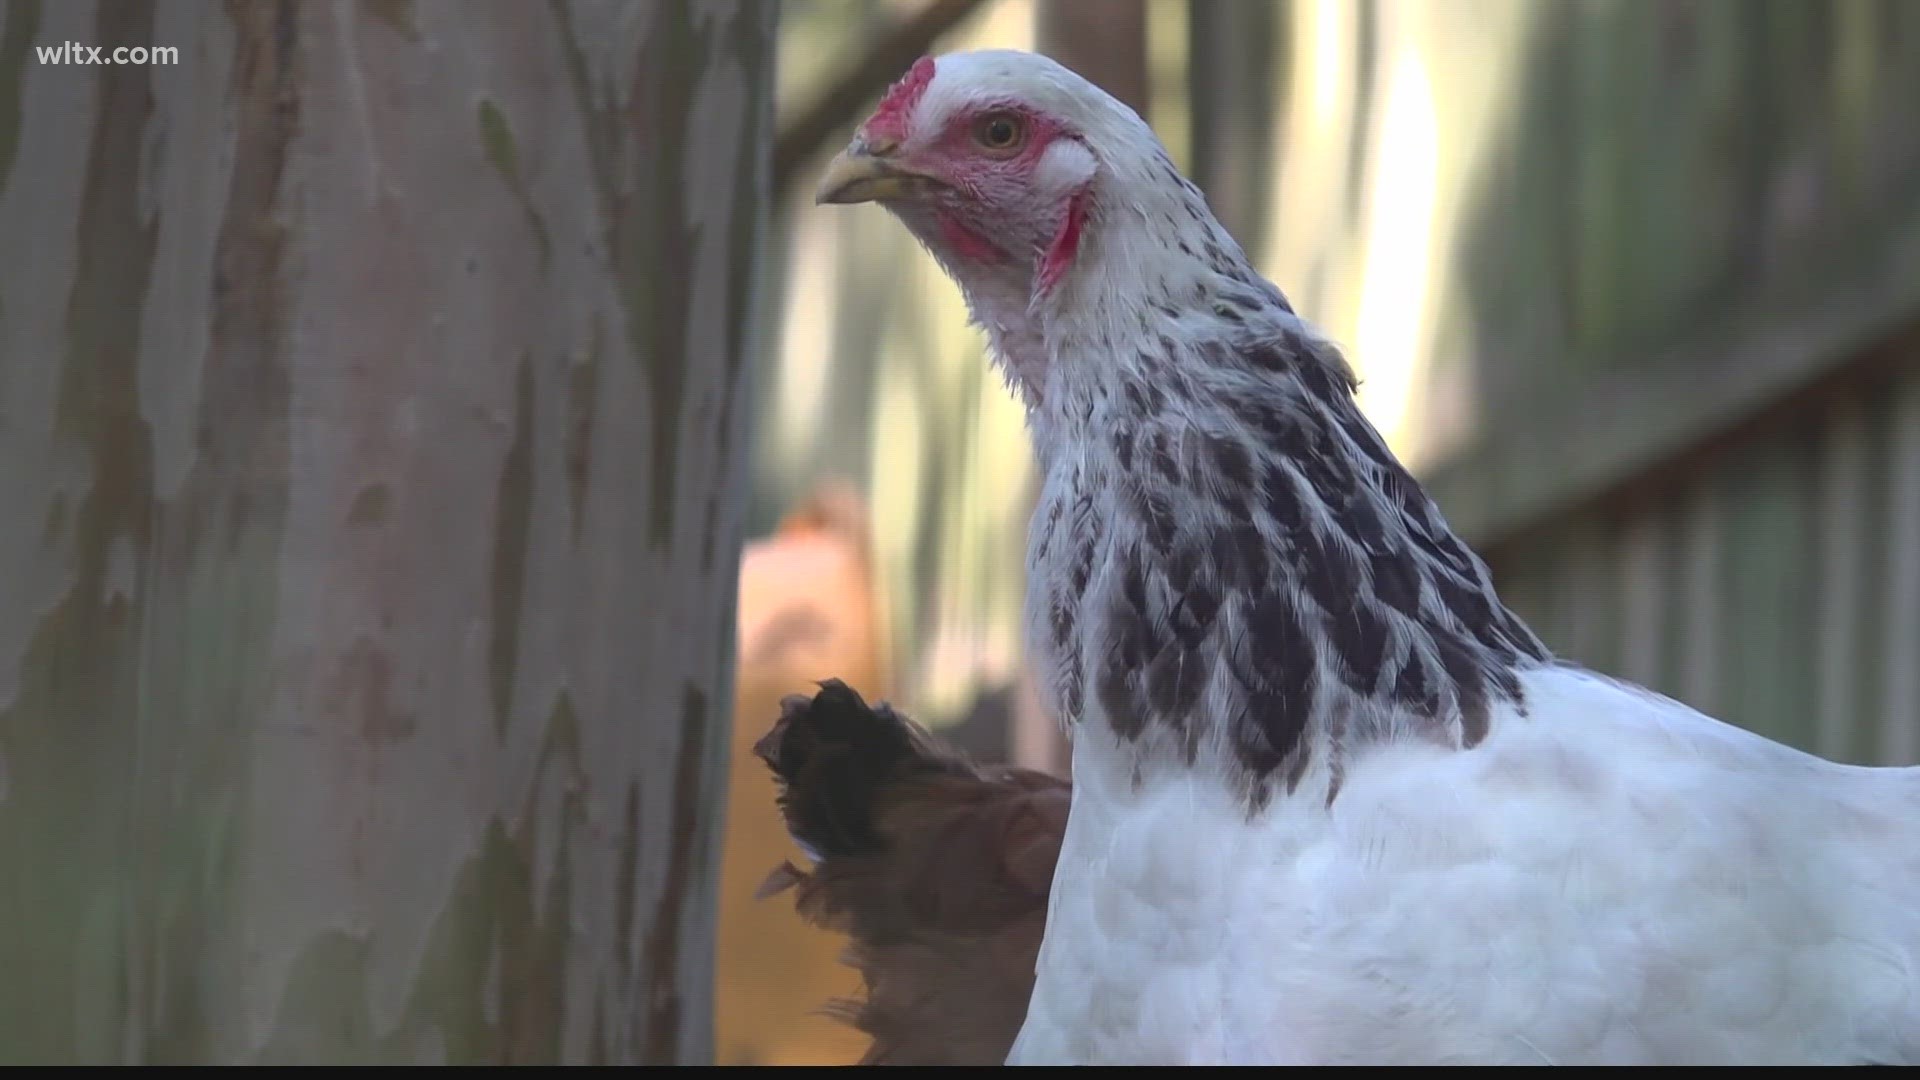 New guidelines for owning chickens in the city and no roosters.